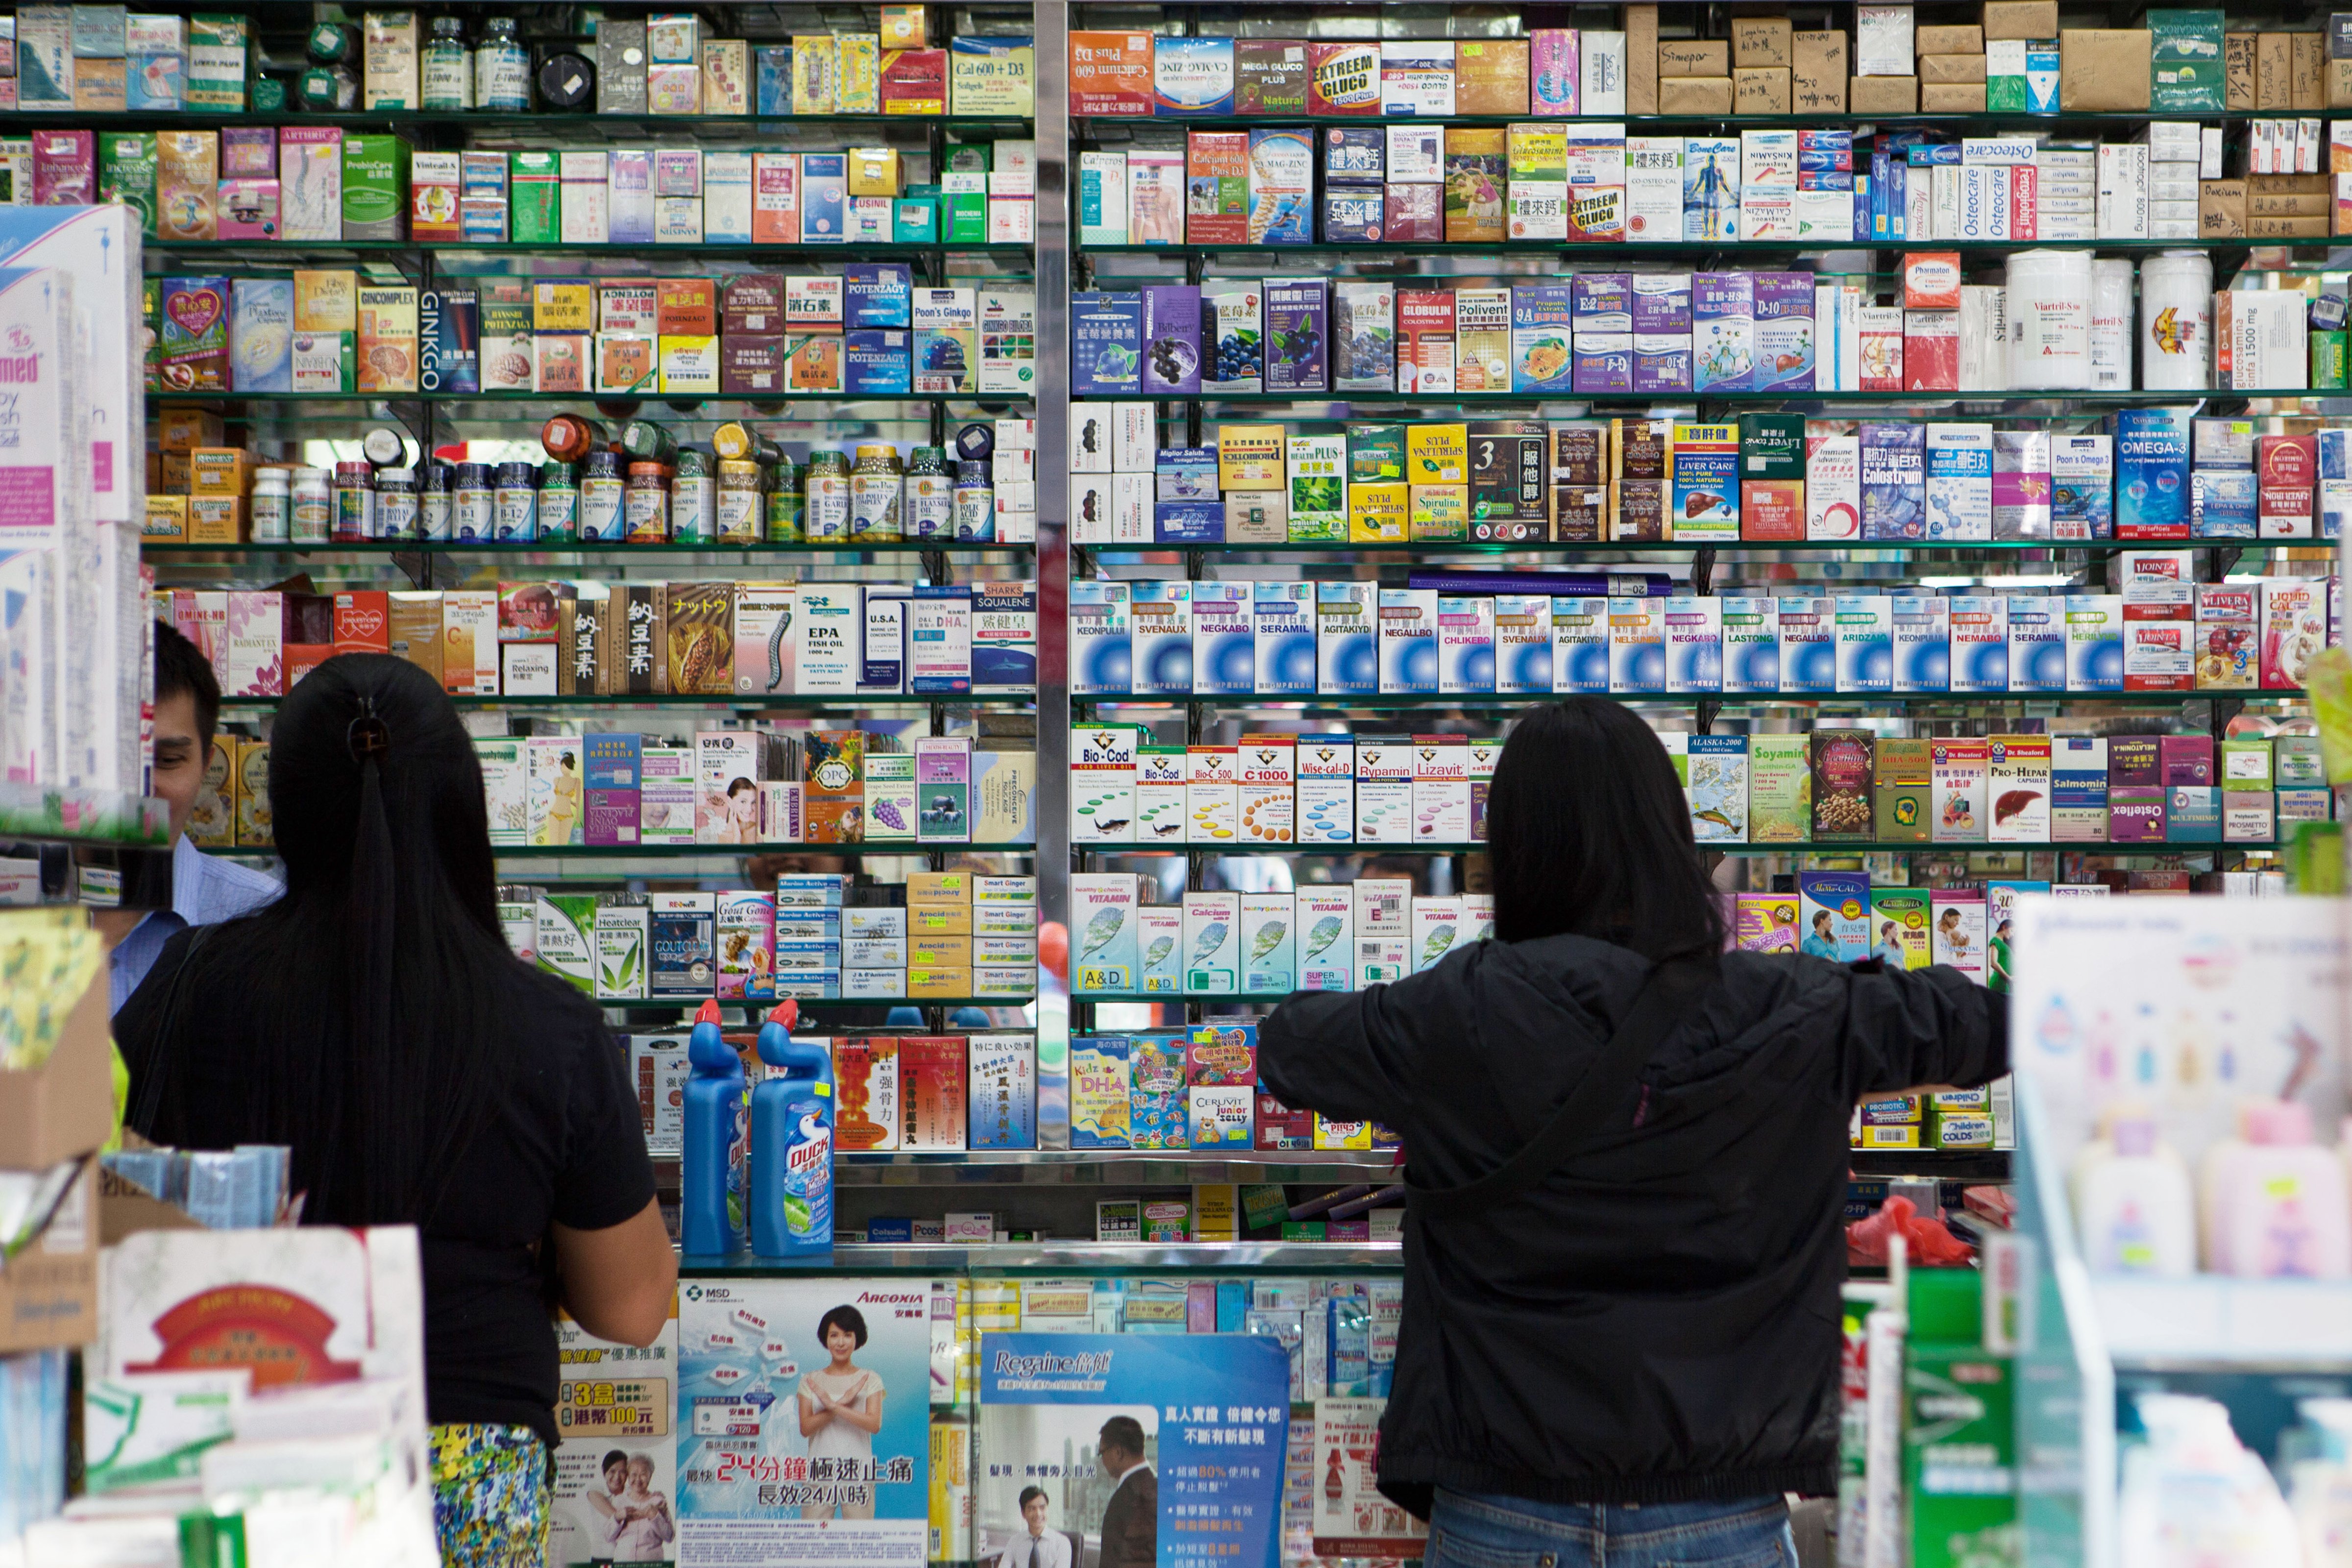 This picture taken on Nov. 18, 2013, shows customers buying goods in an independent pharmacy in Hong Kong. Safety fears over medication in mainland China are driving a risky illegal trade in cancer drugs in Hong Kong, experts say (AFP/Getty Images)